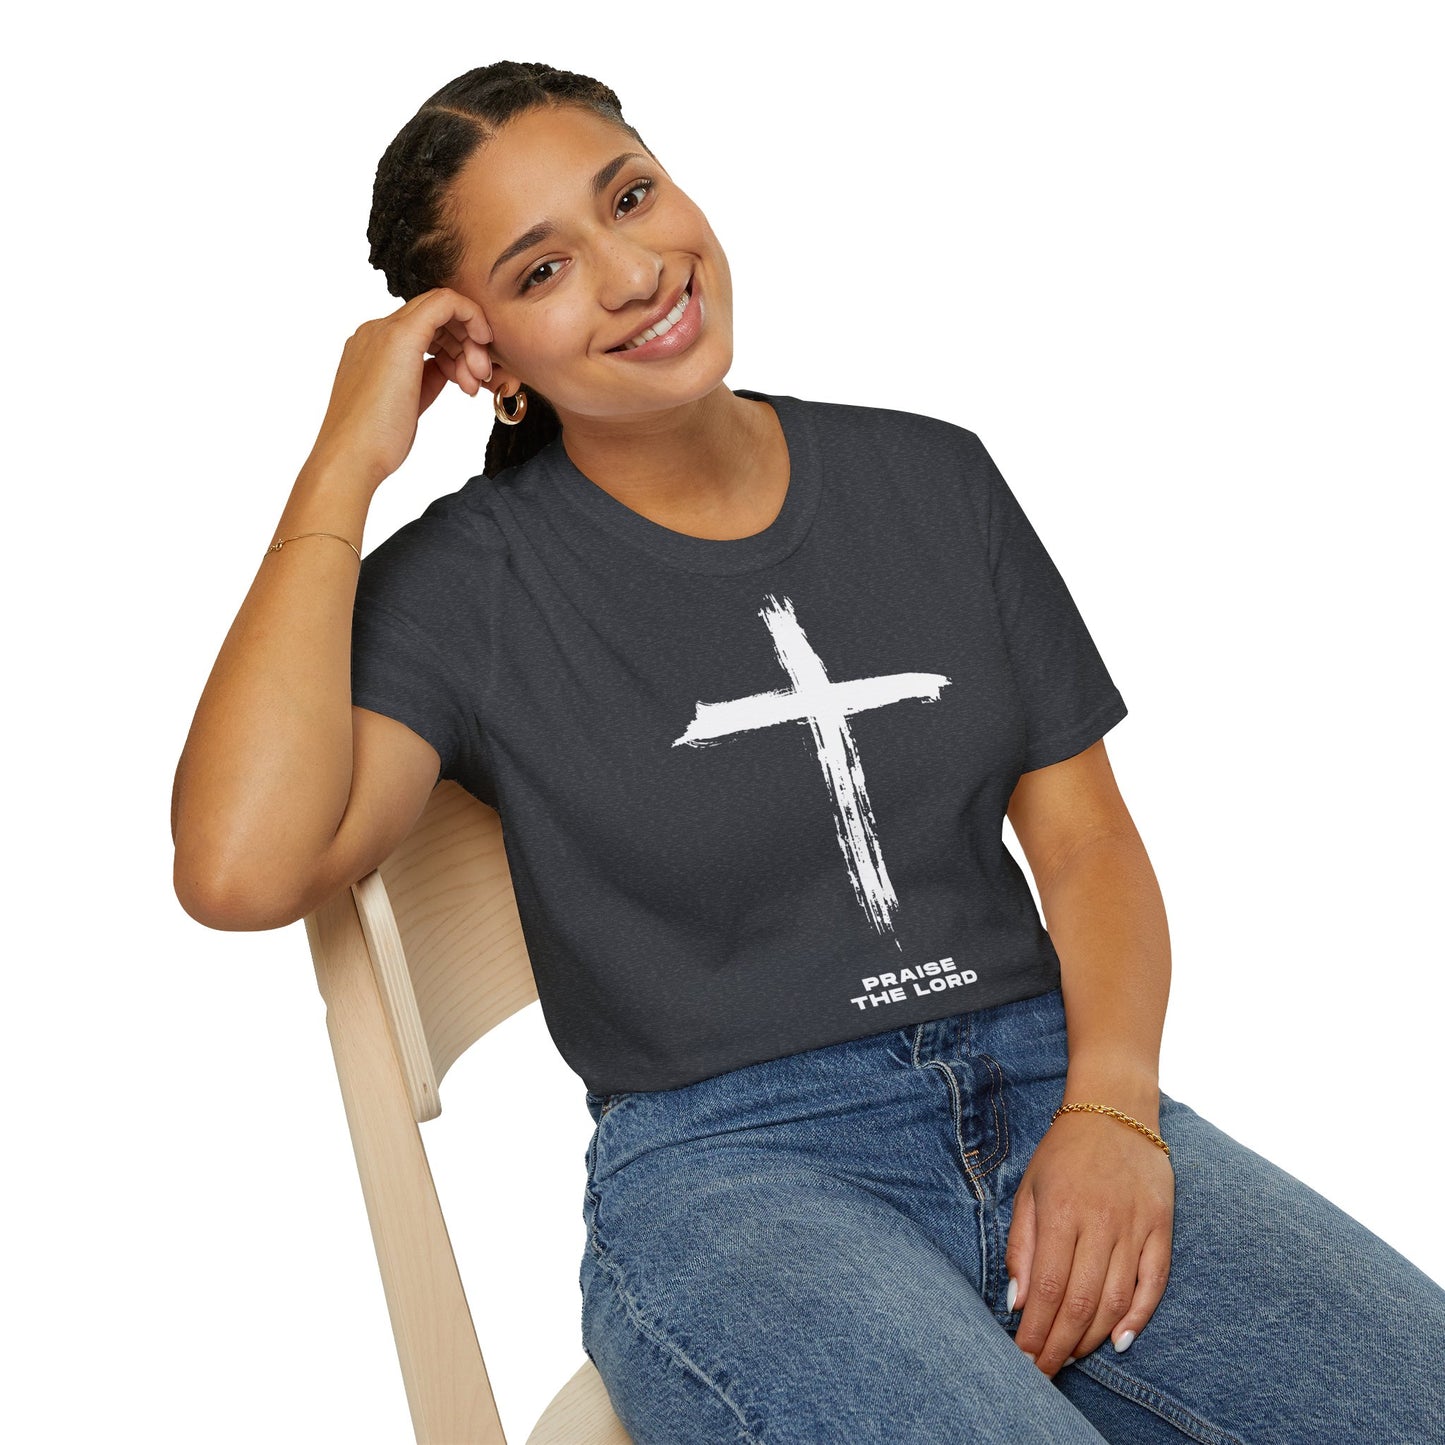 CROSS  Softstyle T-Shirt - (many color options)